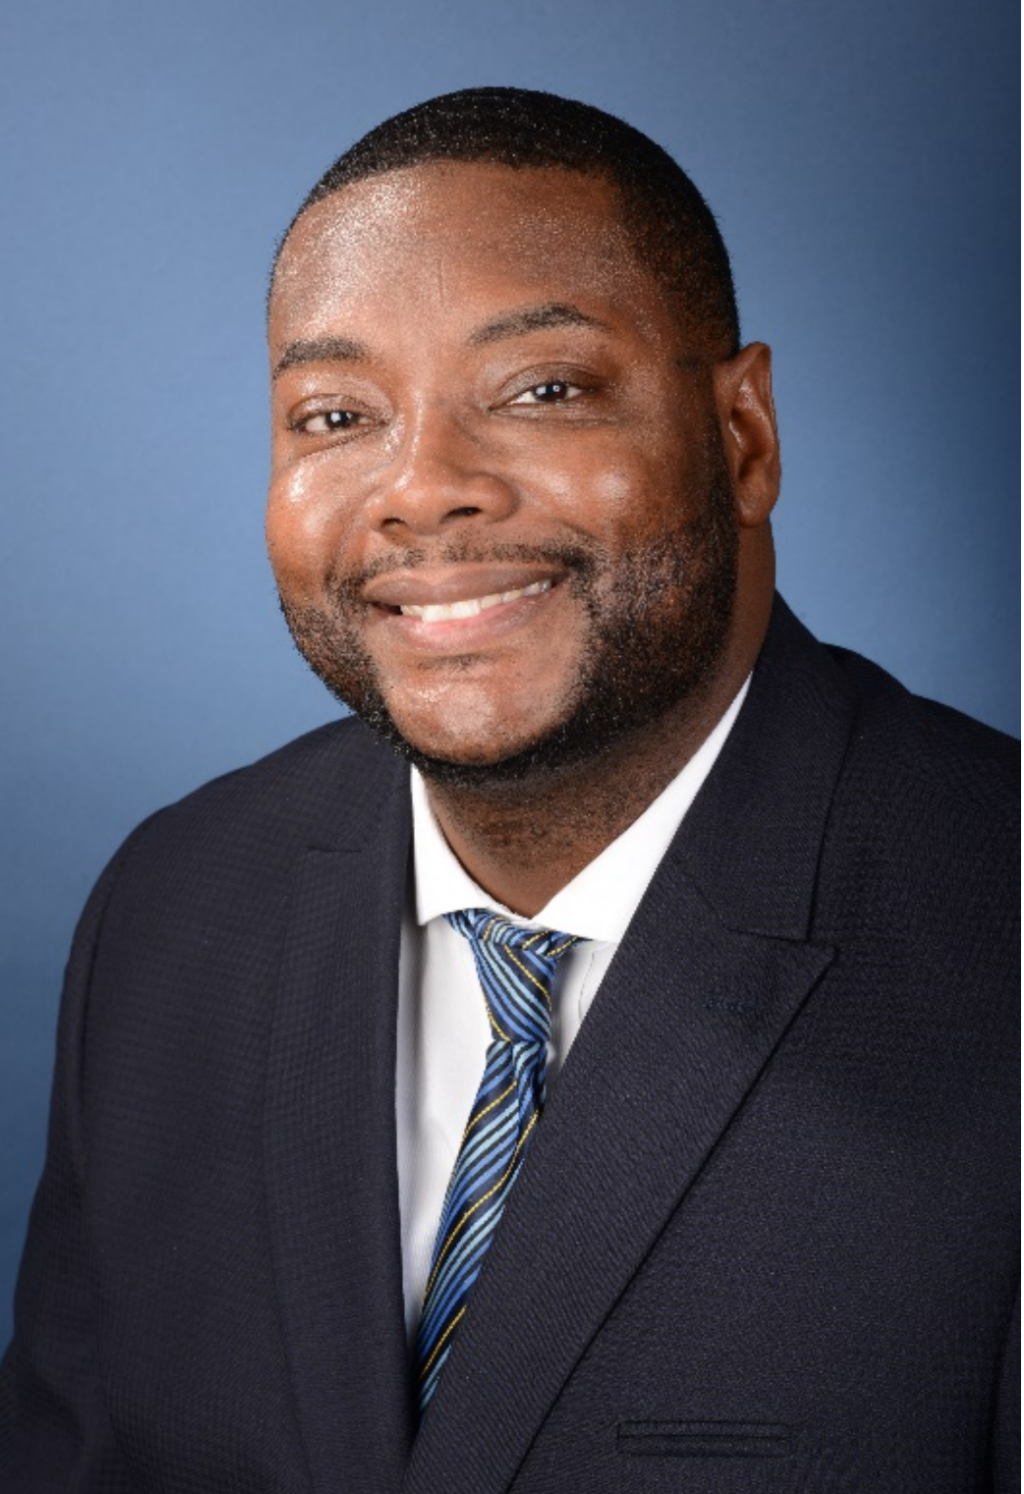 Interview: Lloyd Knight, the New Principal of Charles A. Tindley Accelerated School